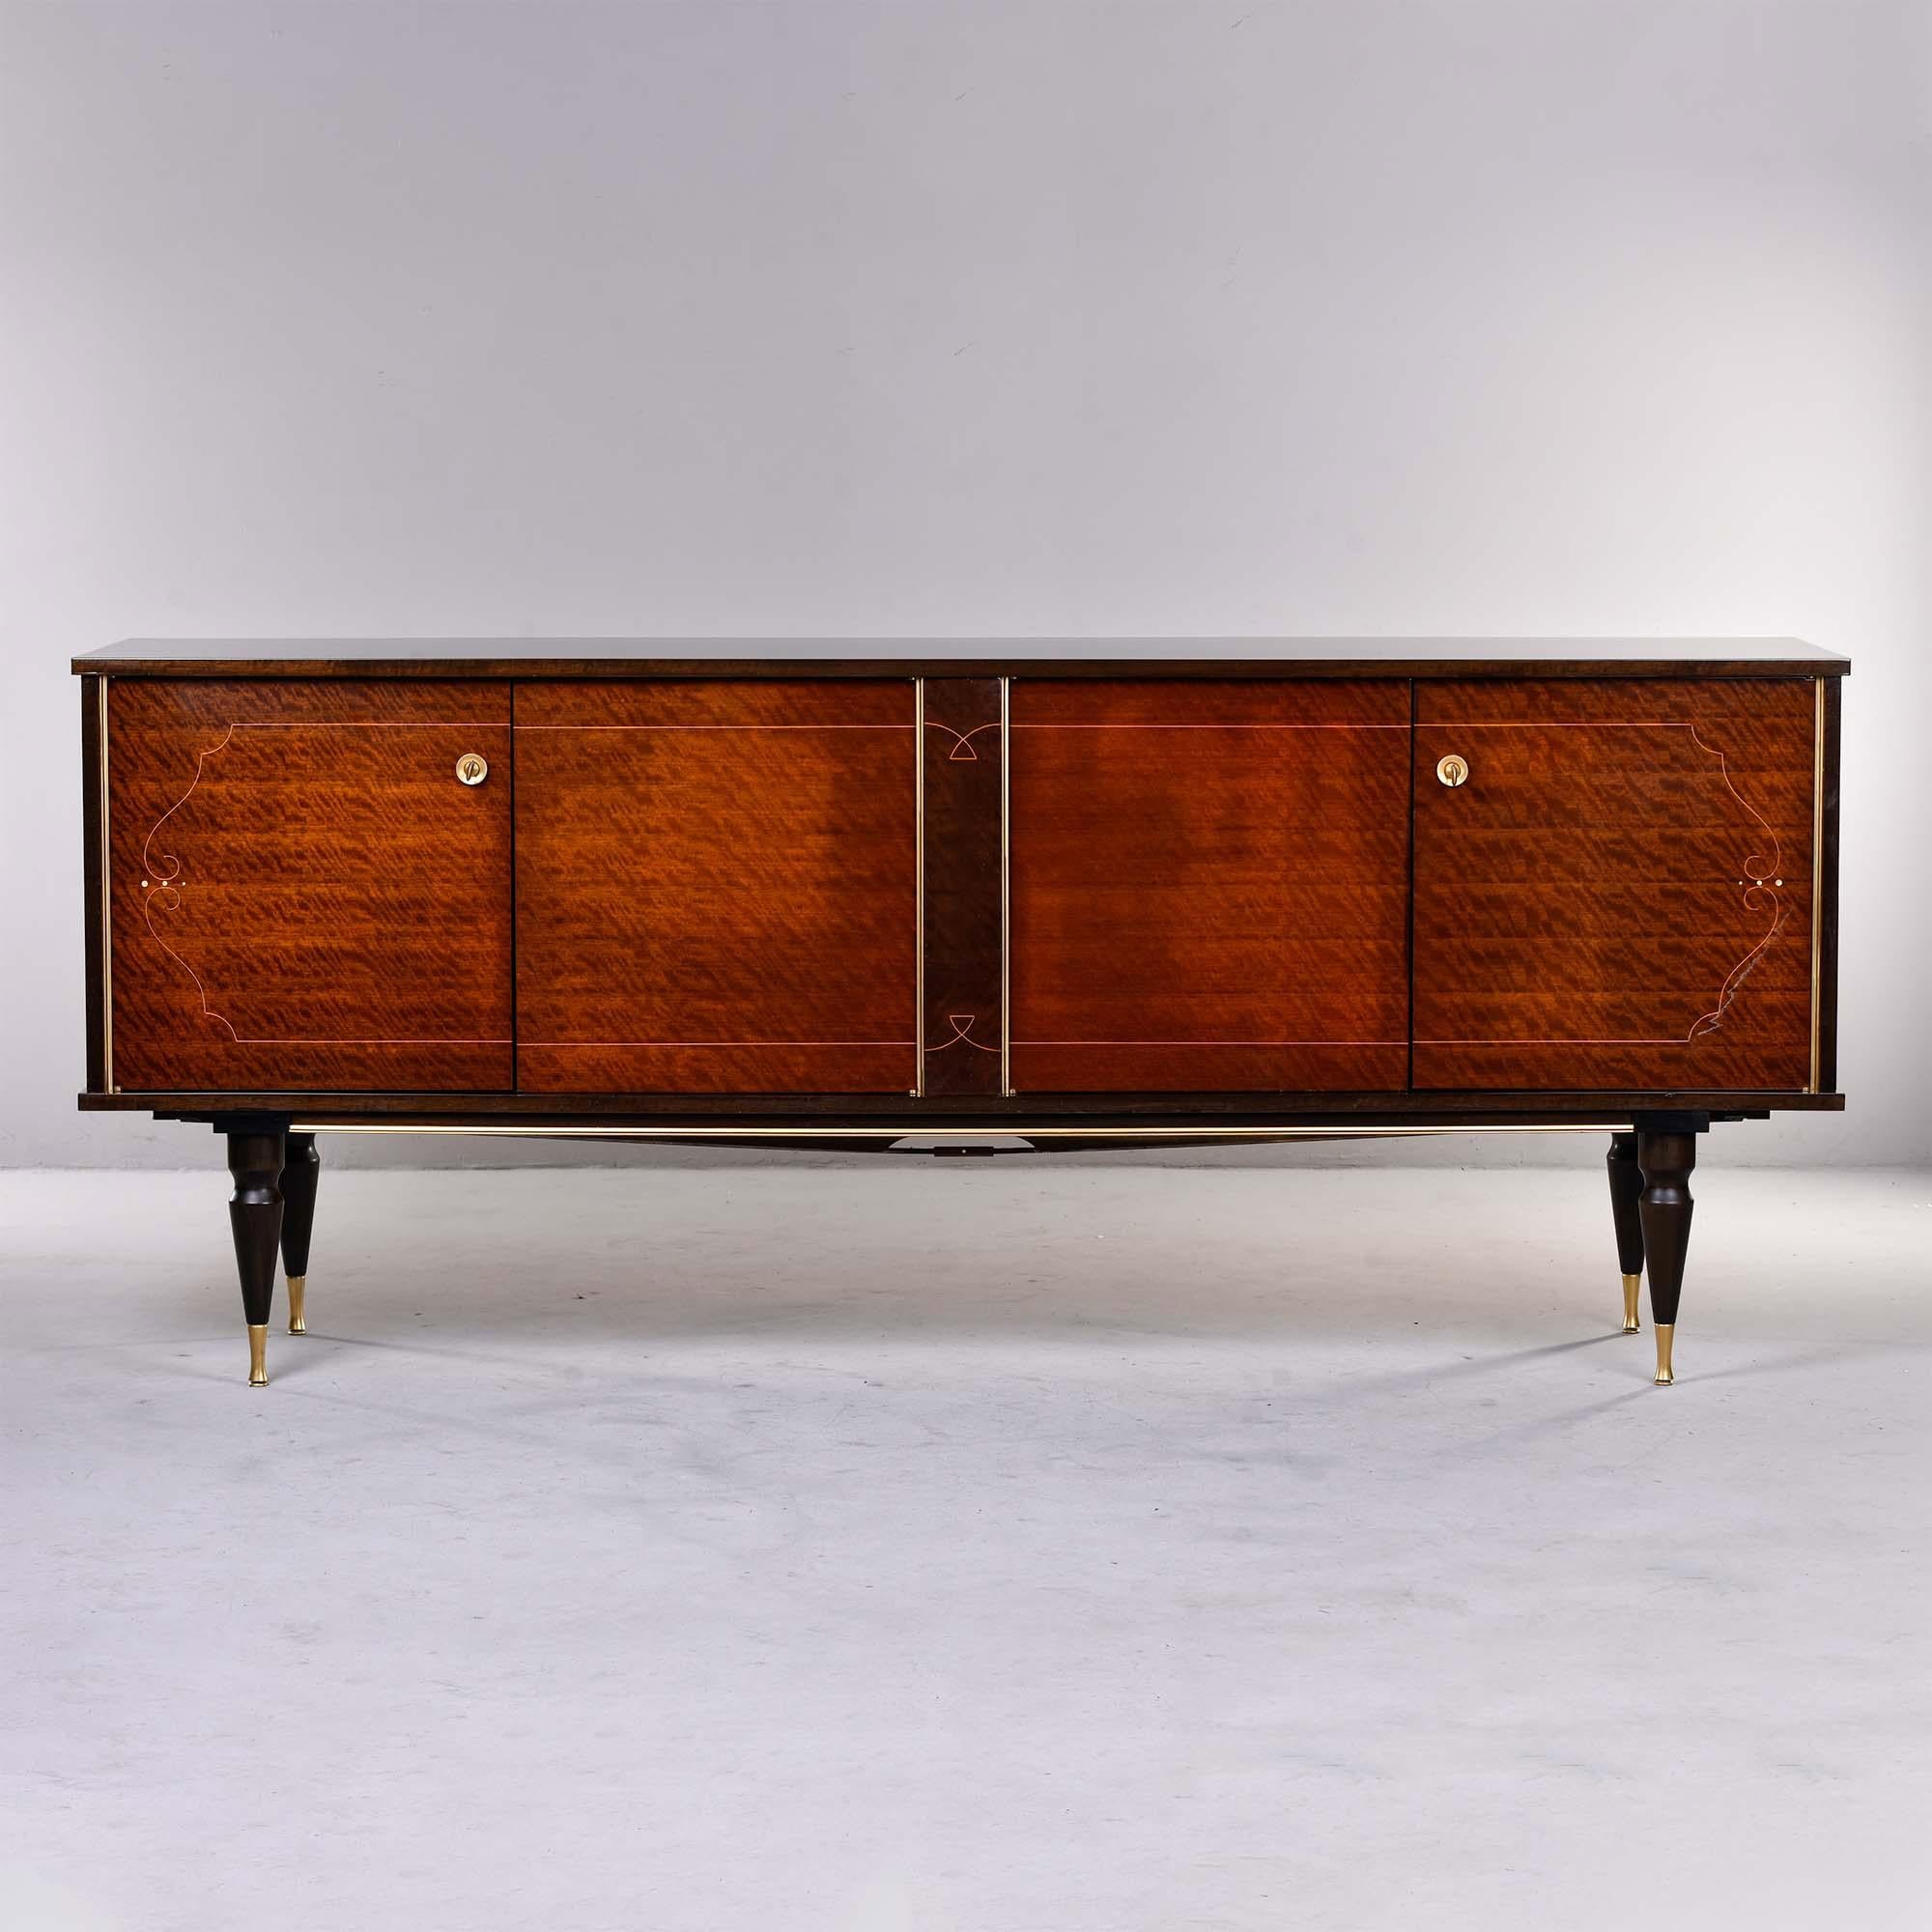 Circa 1940s French buffet or credenza in mahogany with contrasting legs, accents and brass trim. Cabinets on both sides have functional locks. Both storage compartments have a single internal shelf and one side has three small drawers as well.